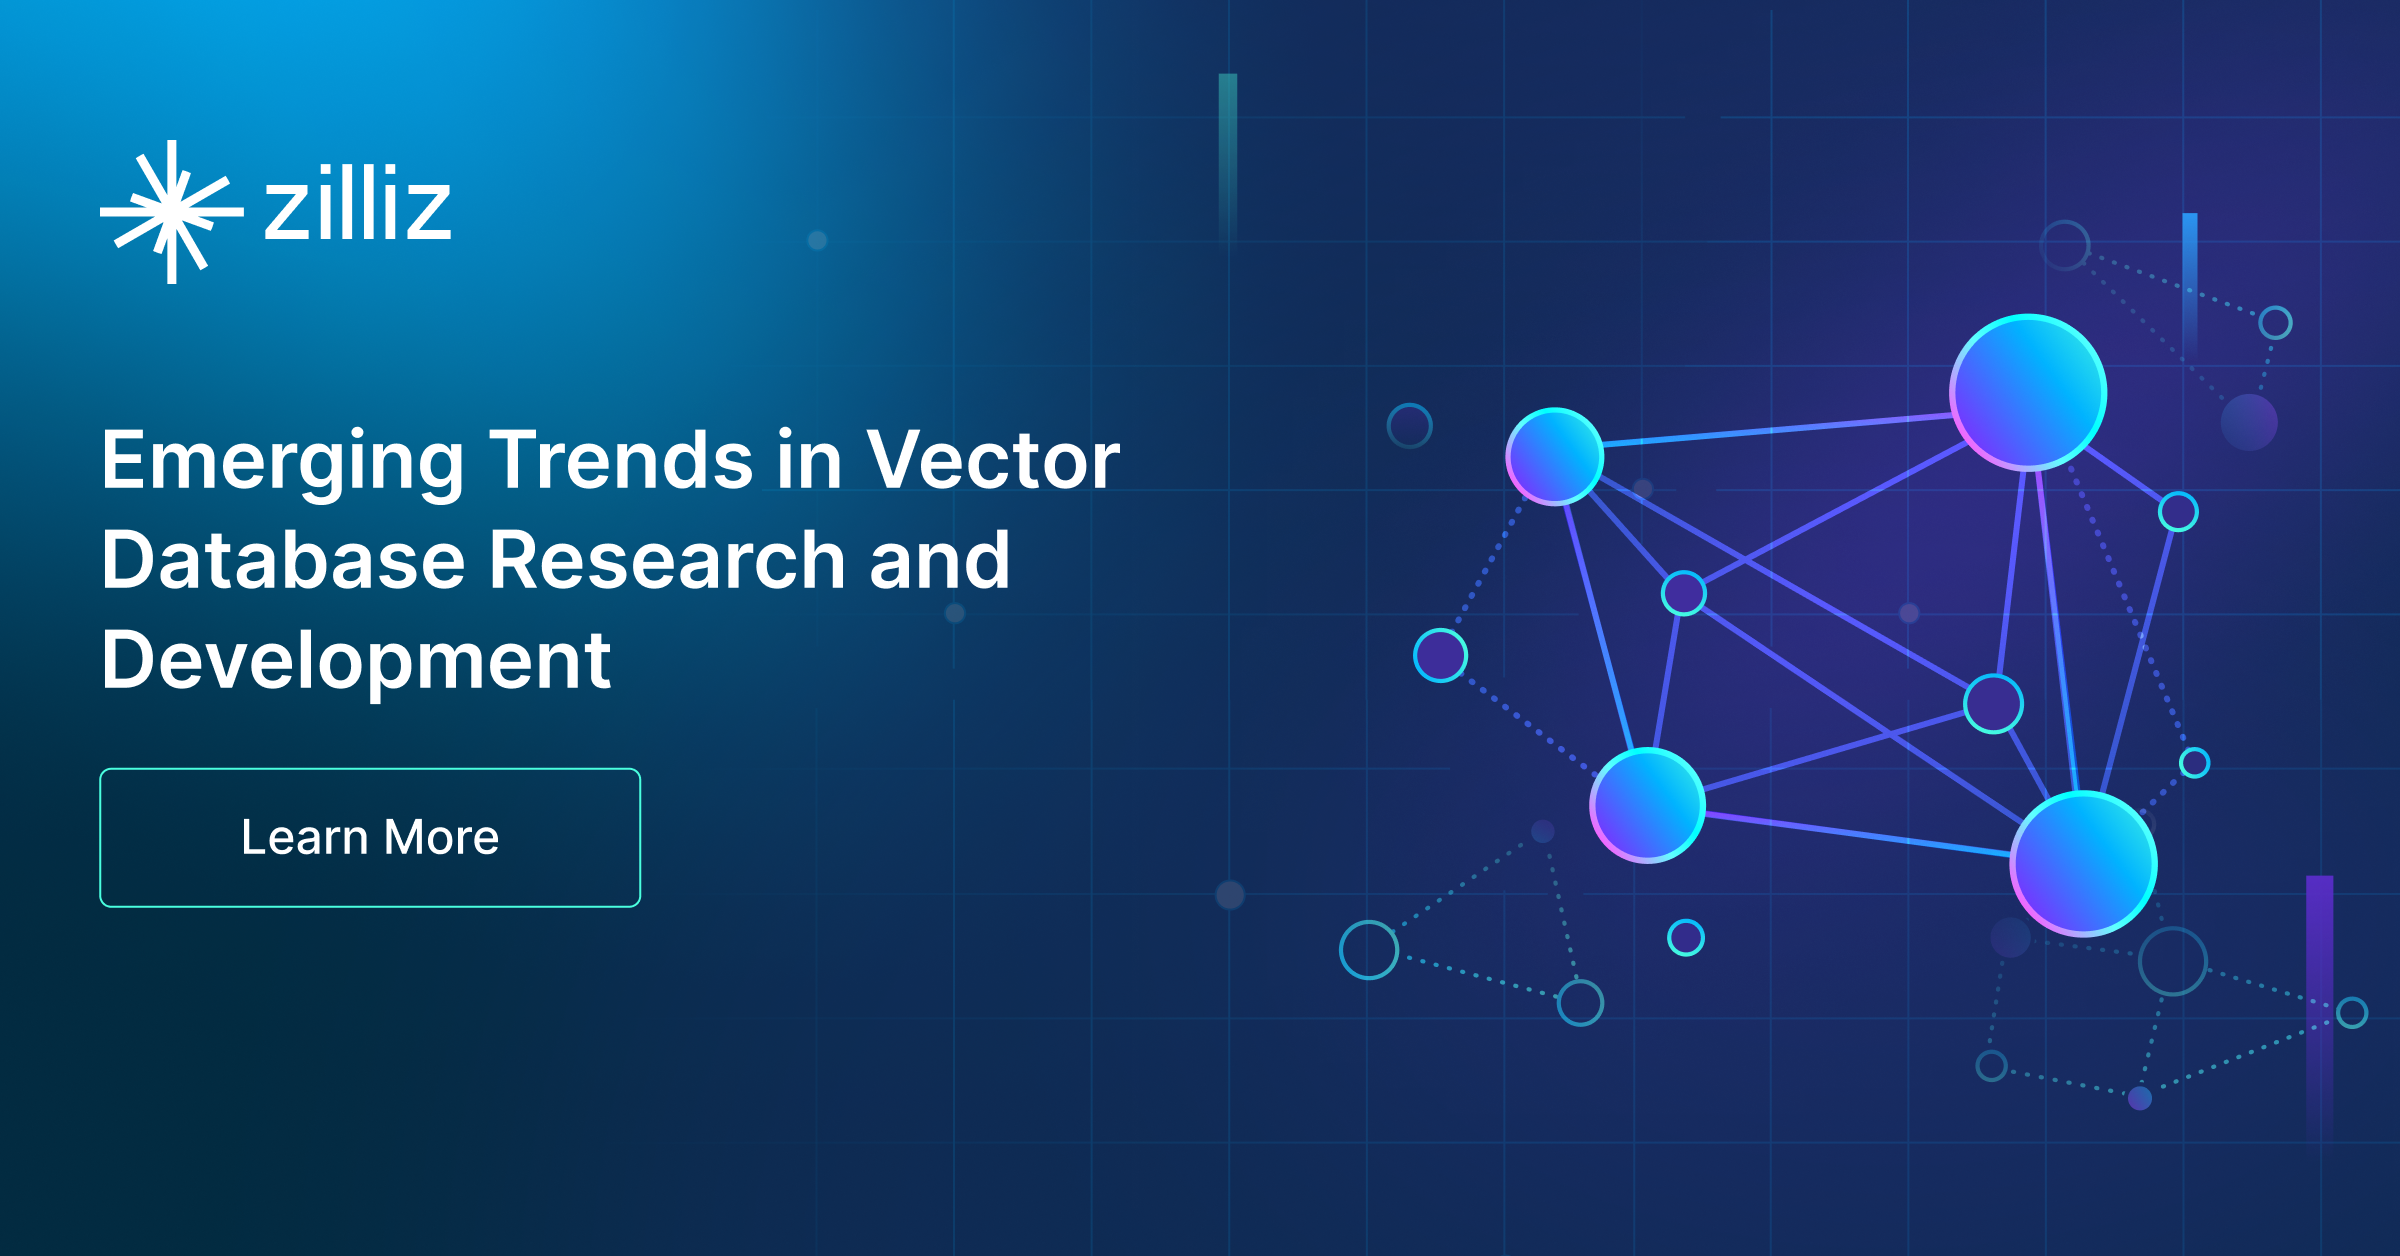 First introduced with Milvus in 2019, vector databases have rapidly risen to prominence alongside the emergence of large language models (LLMs) and th